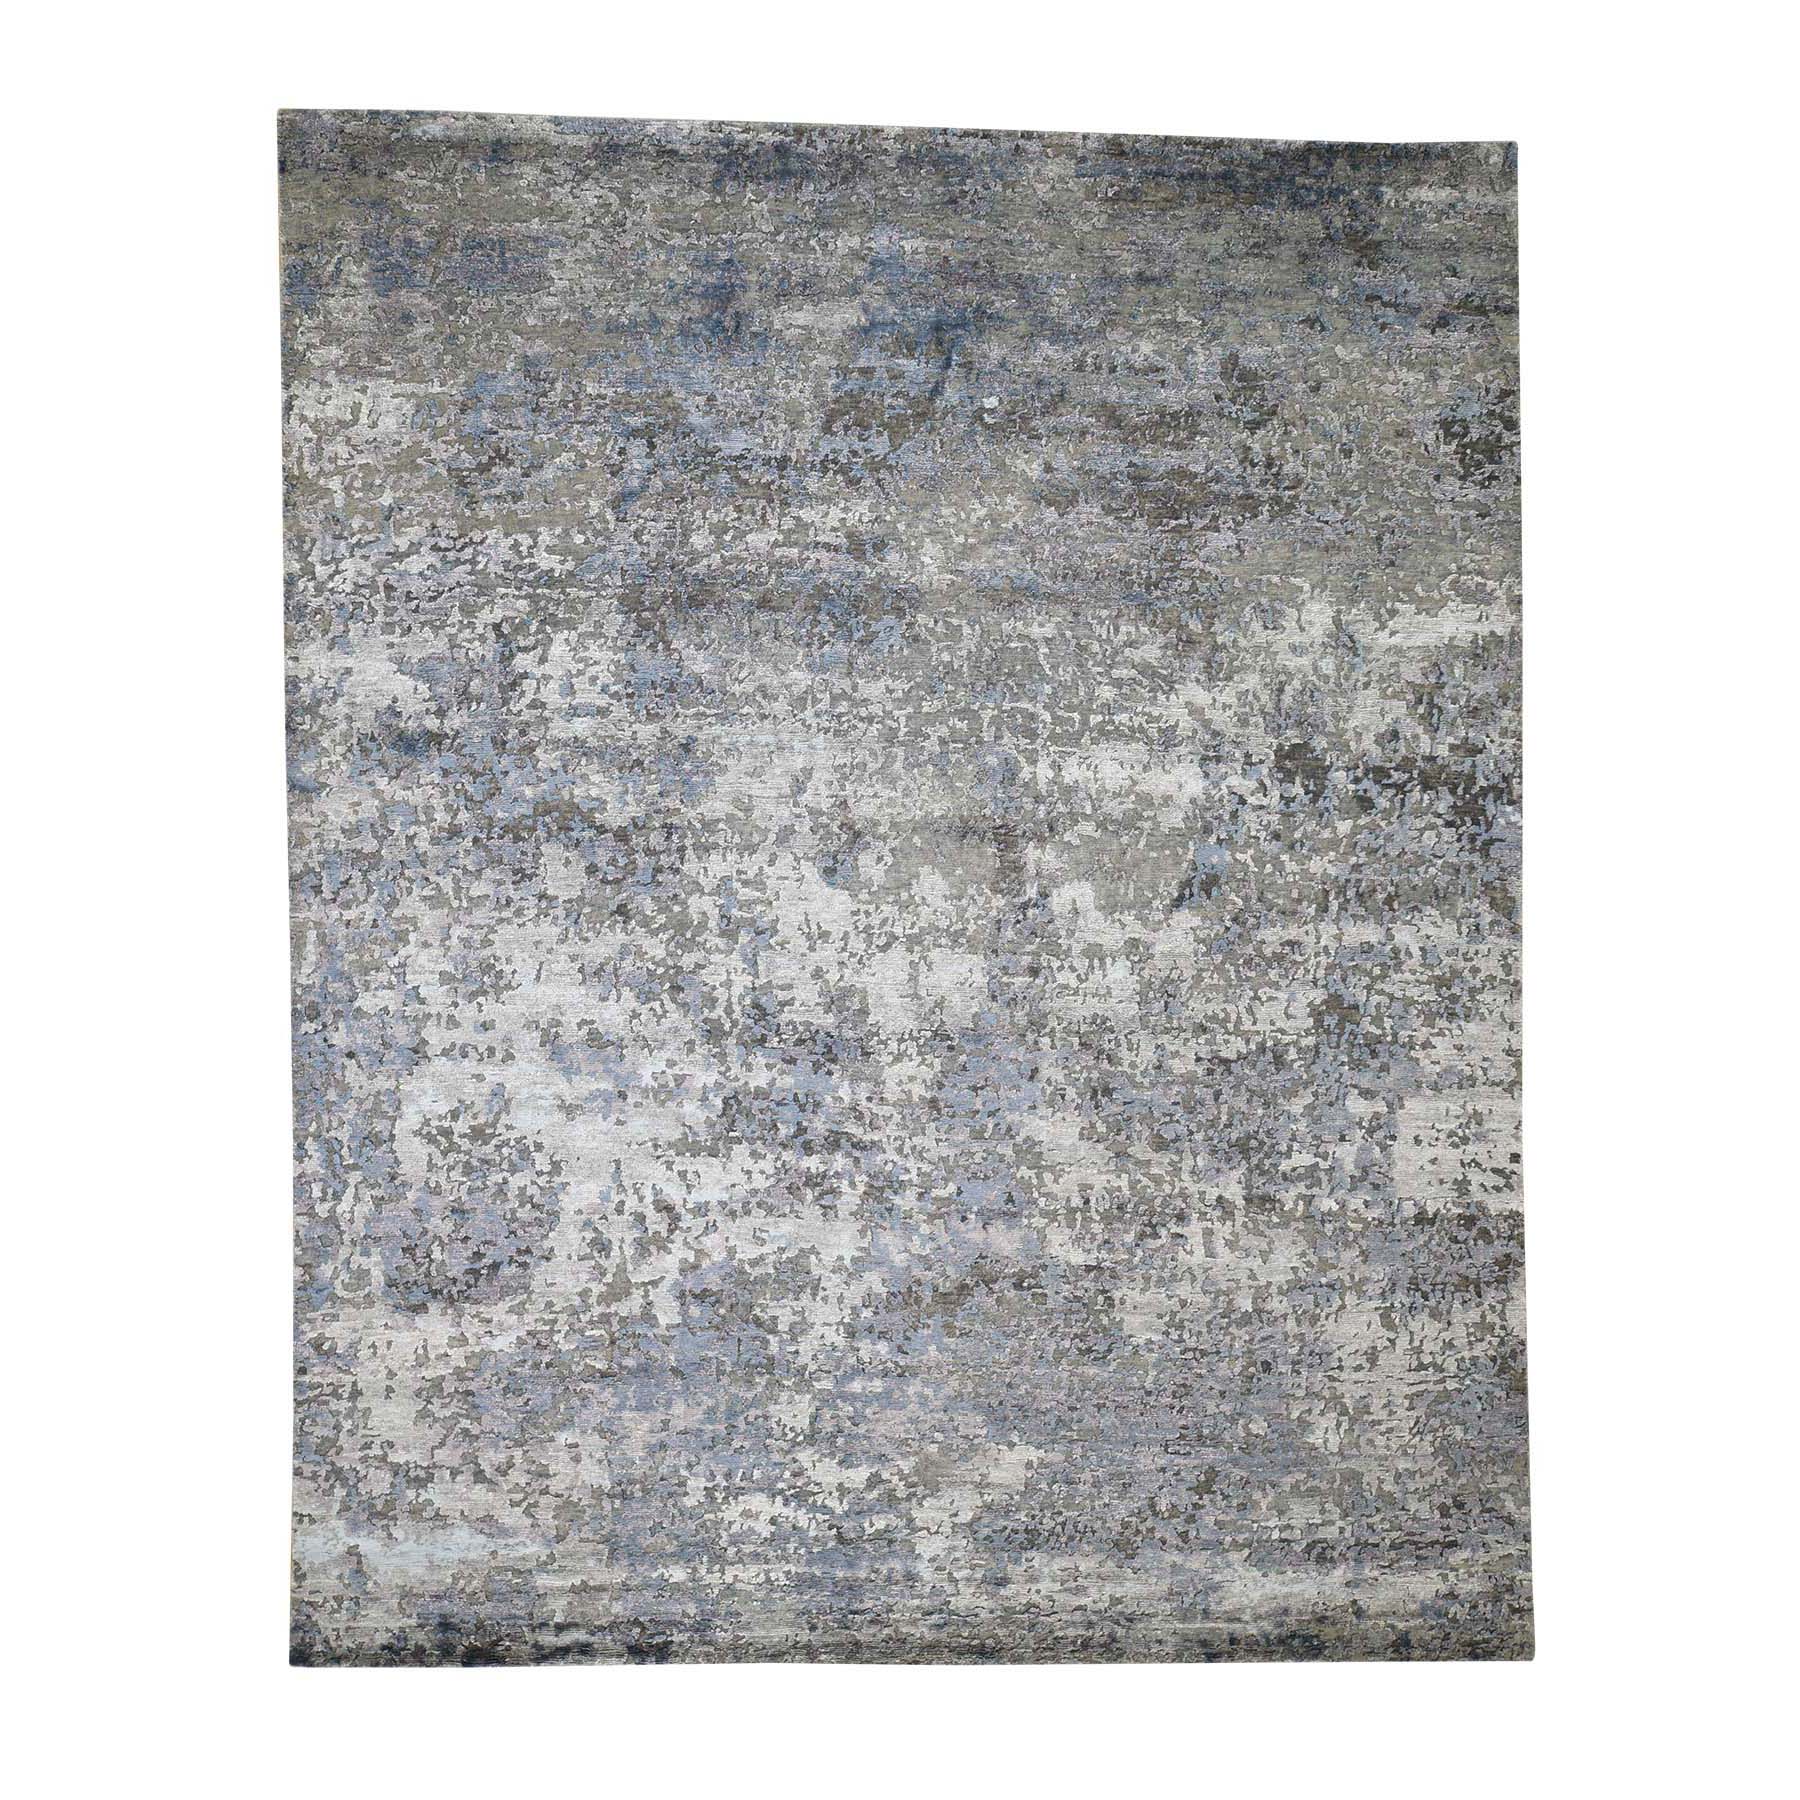 7'10"x9'9" Modern Hi-Low Pile Abstract Design Wool And Silk Hand Woven Modern Rug 